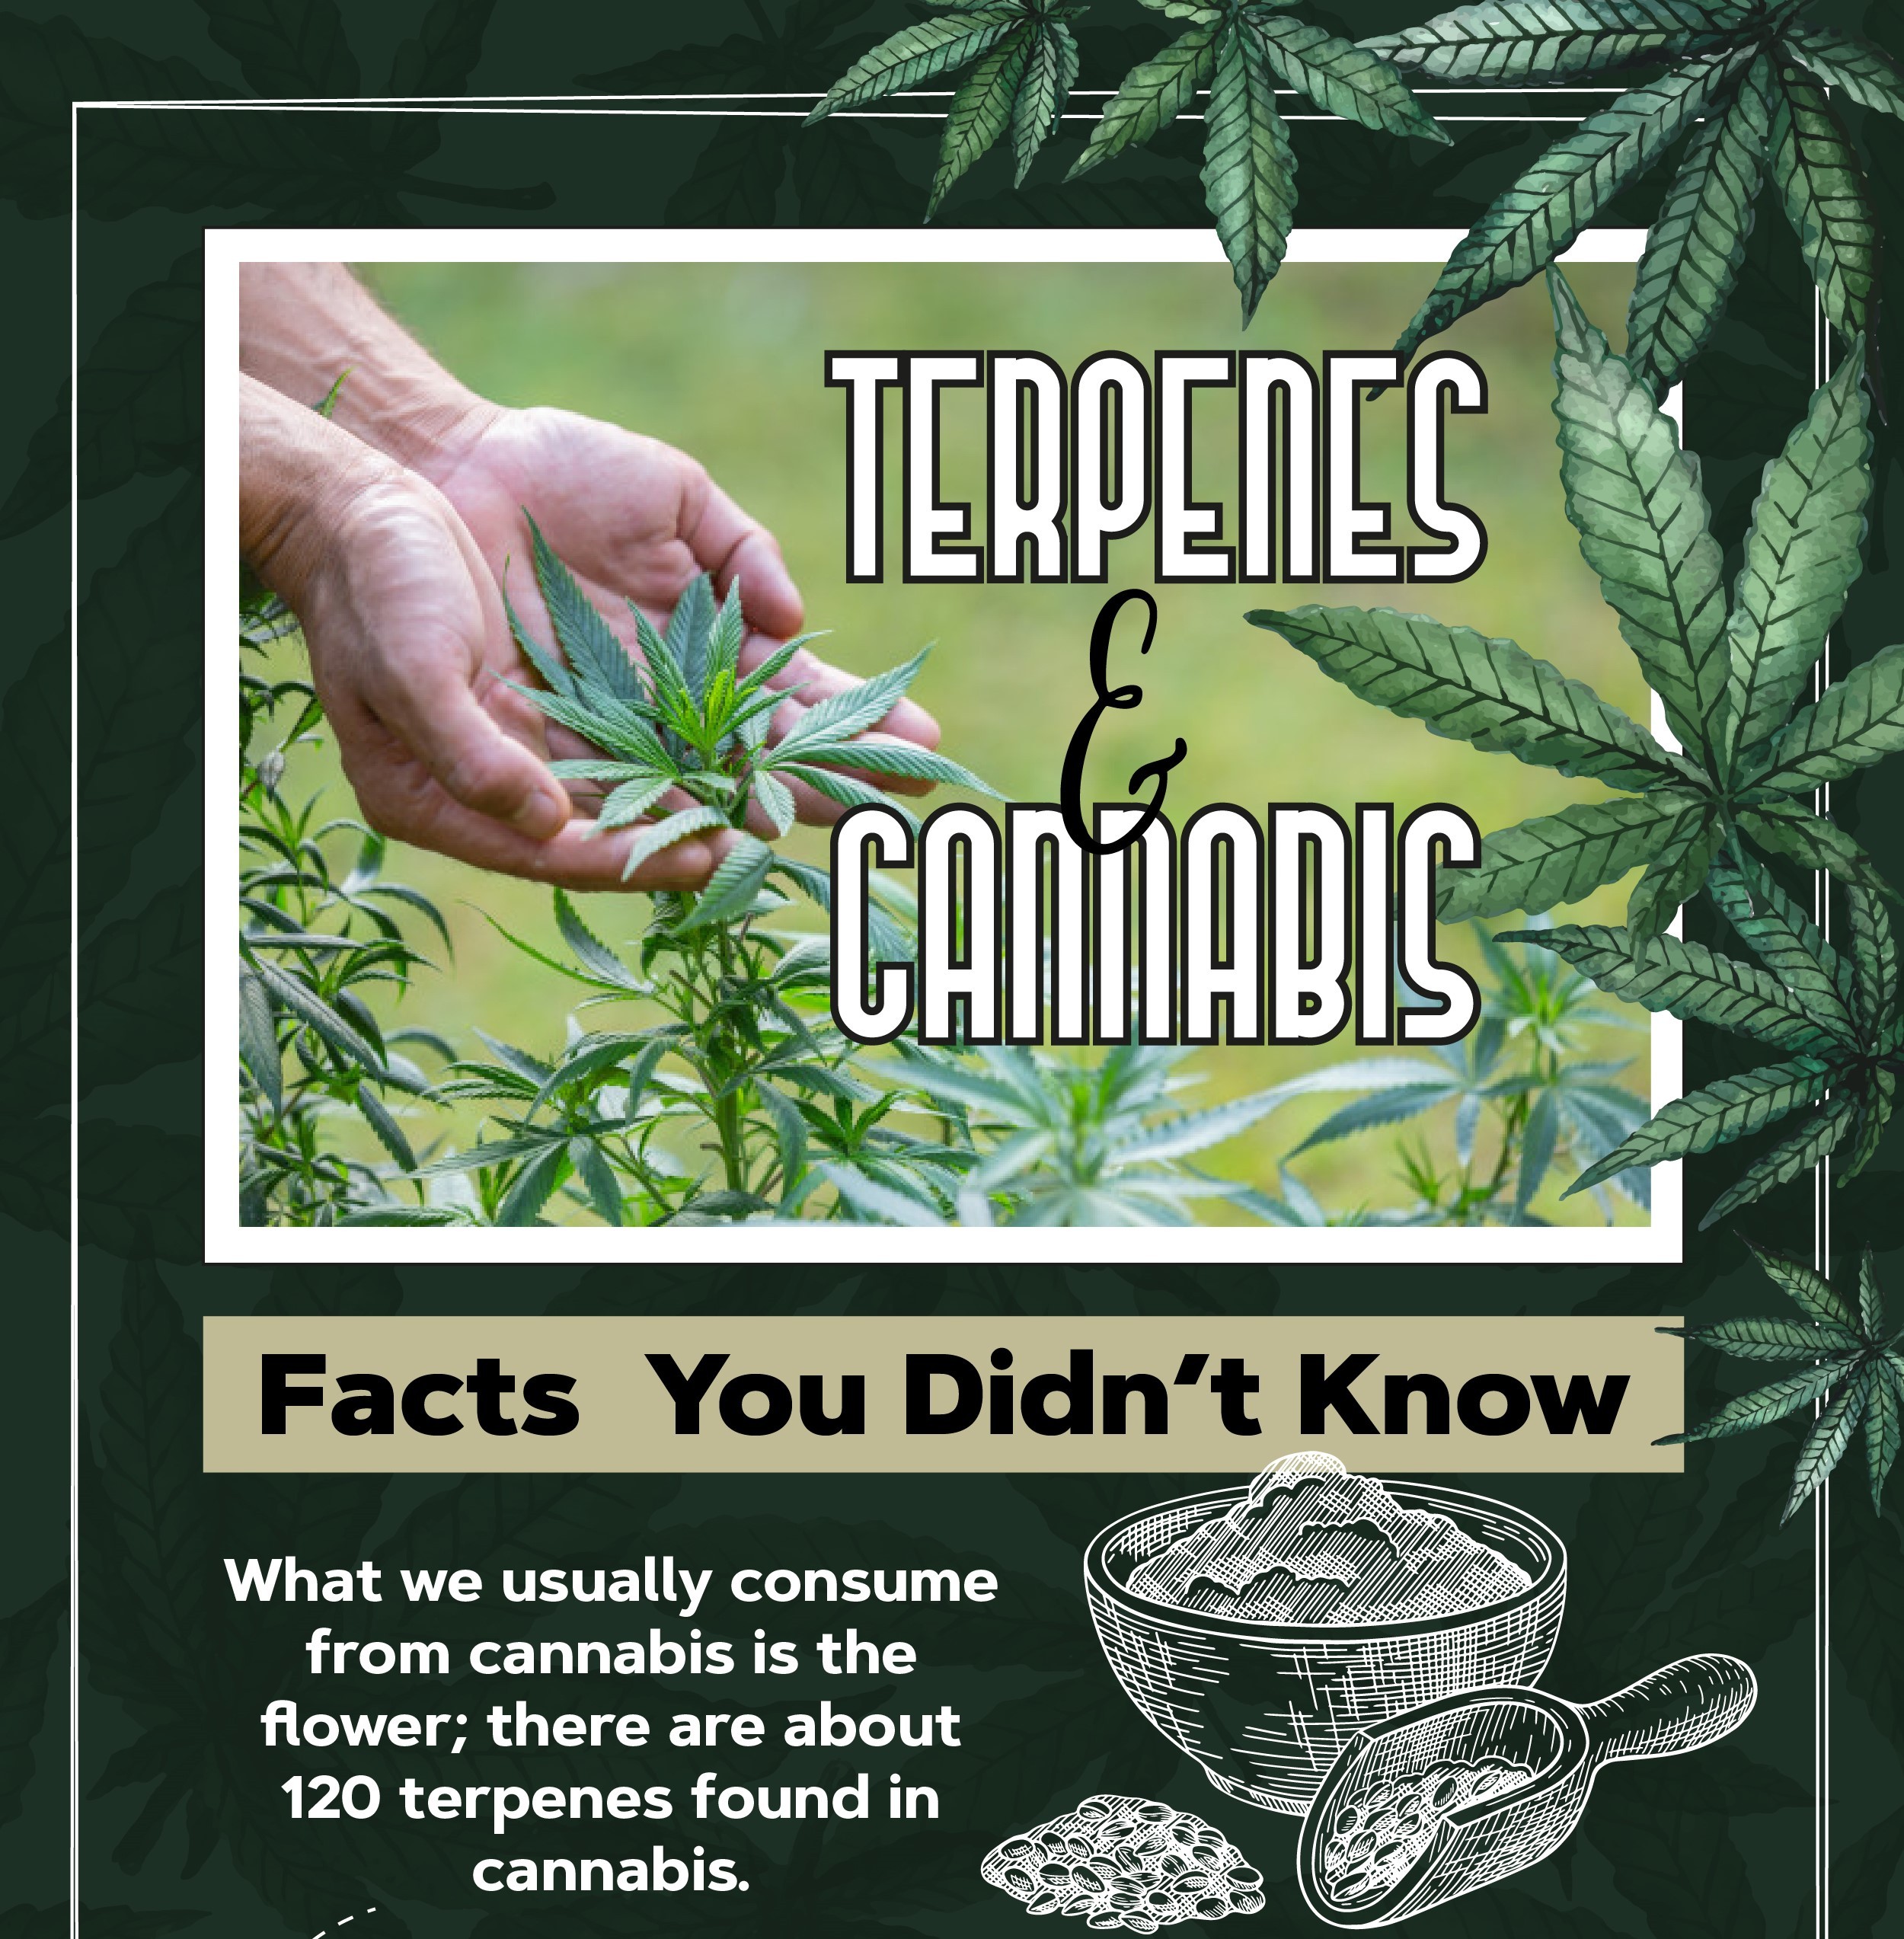 Facts you didn't know about terpenes and cannabis